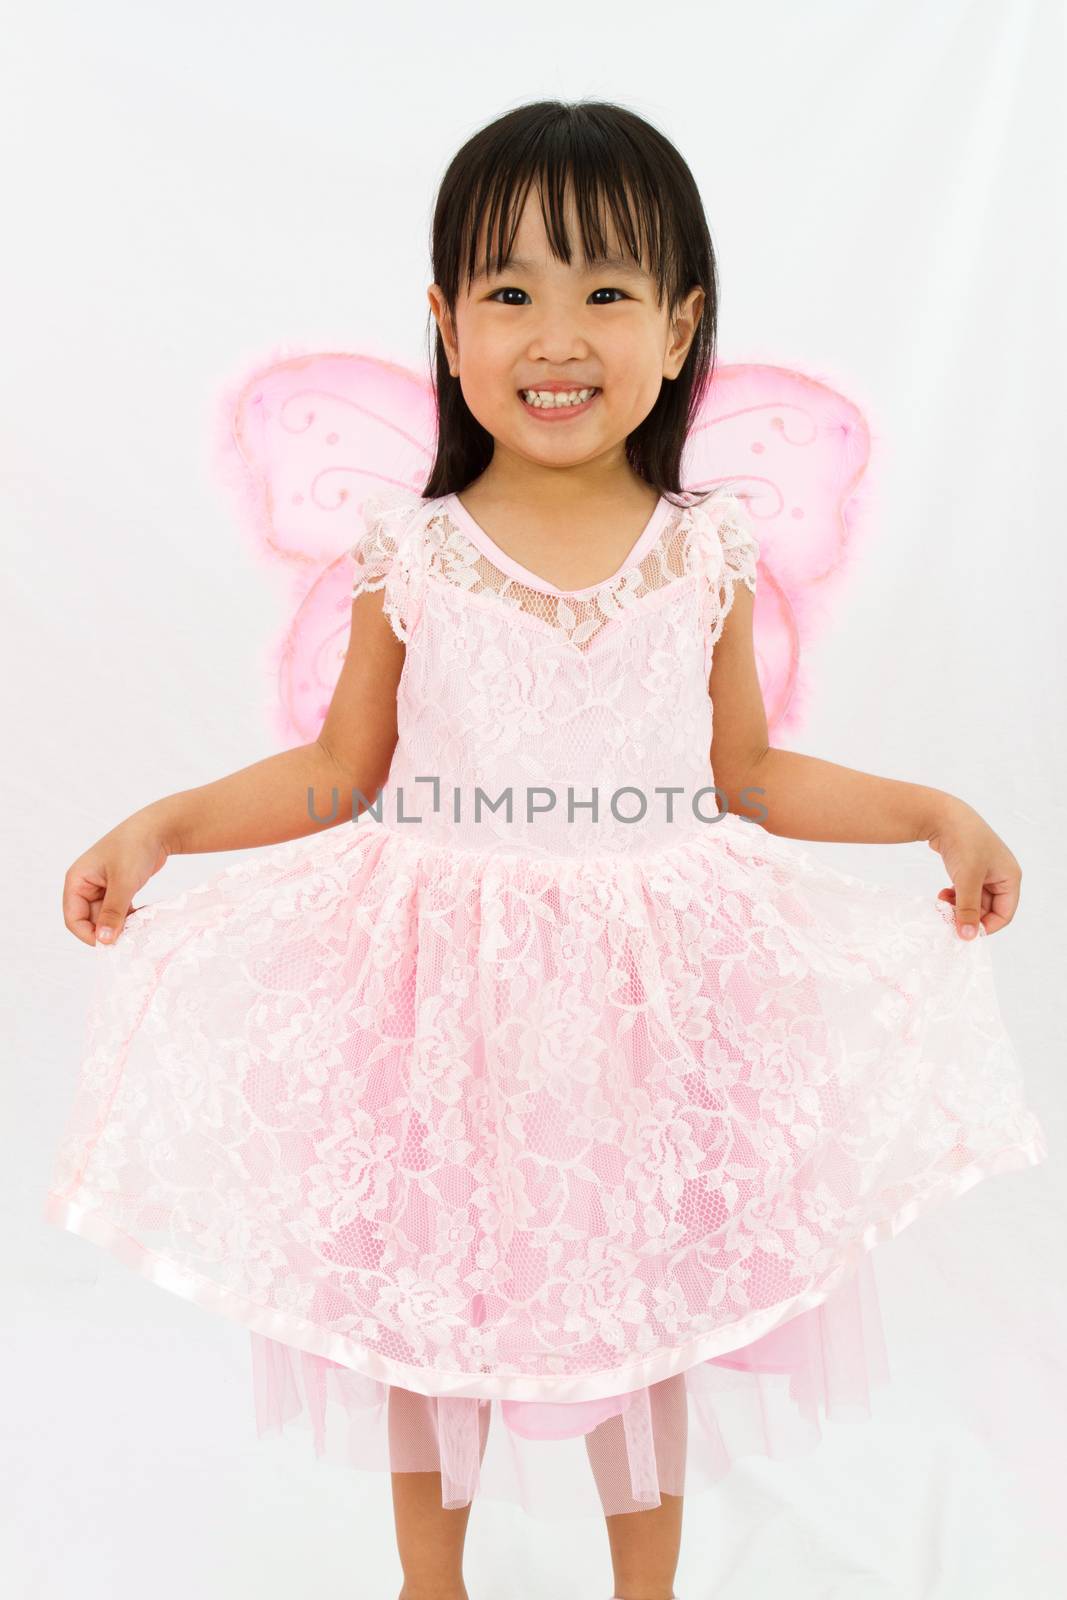 Chinese little girl wearing butterfly custome in plain white background